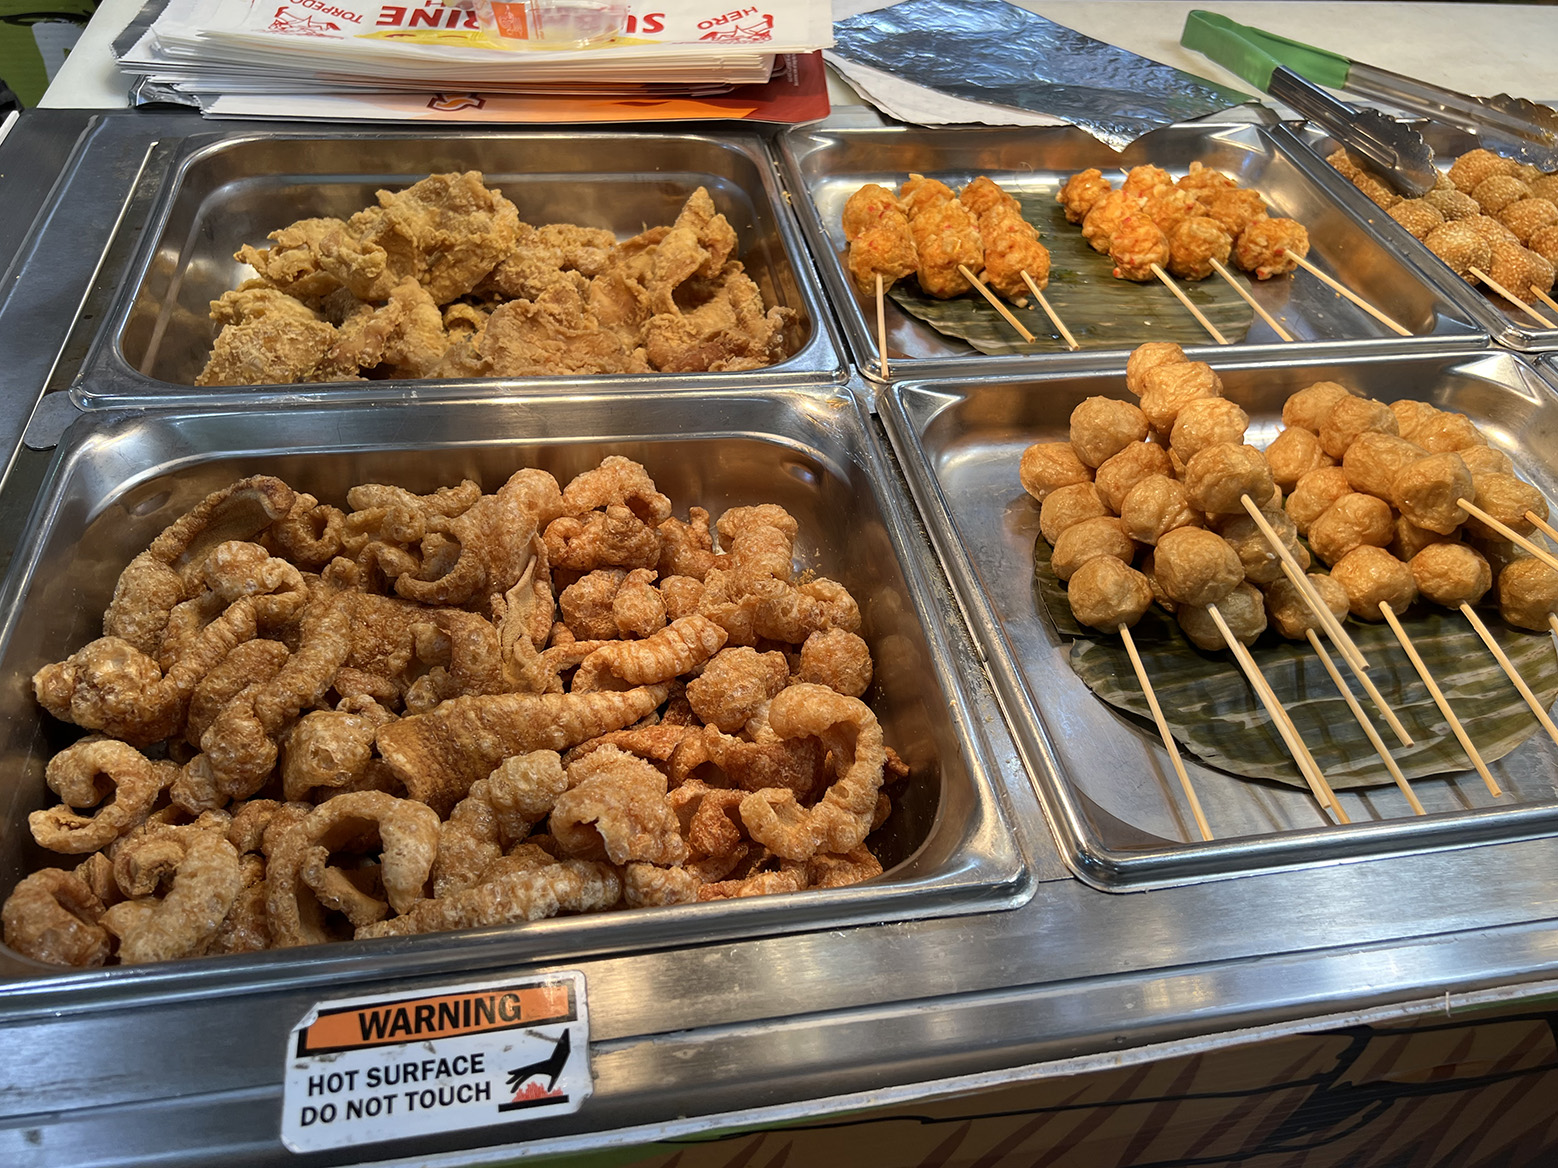 Streetfood - Seafood City Supermarket in Irvine, California - Photo by Julie Nguyen